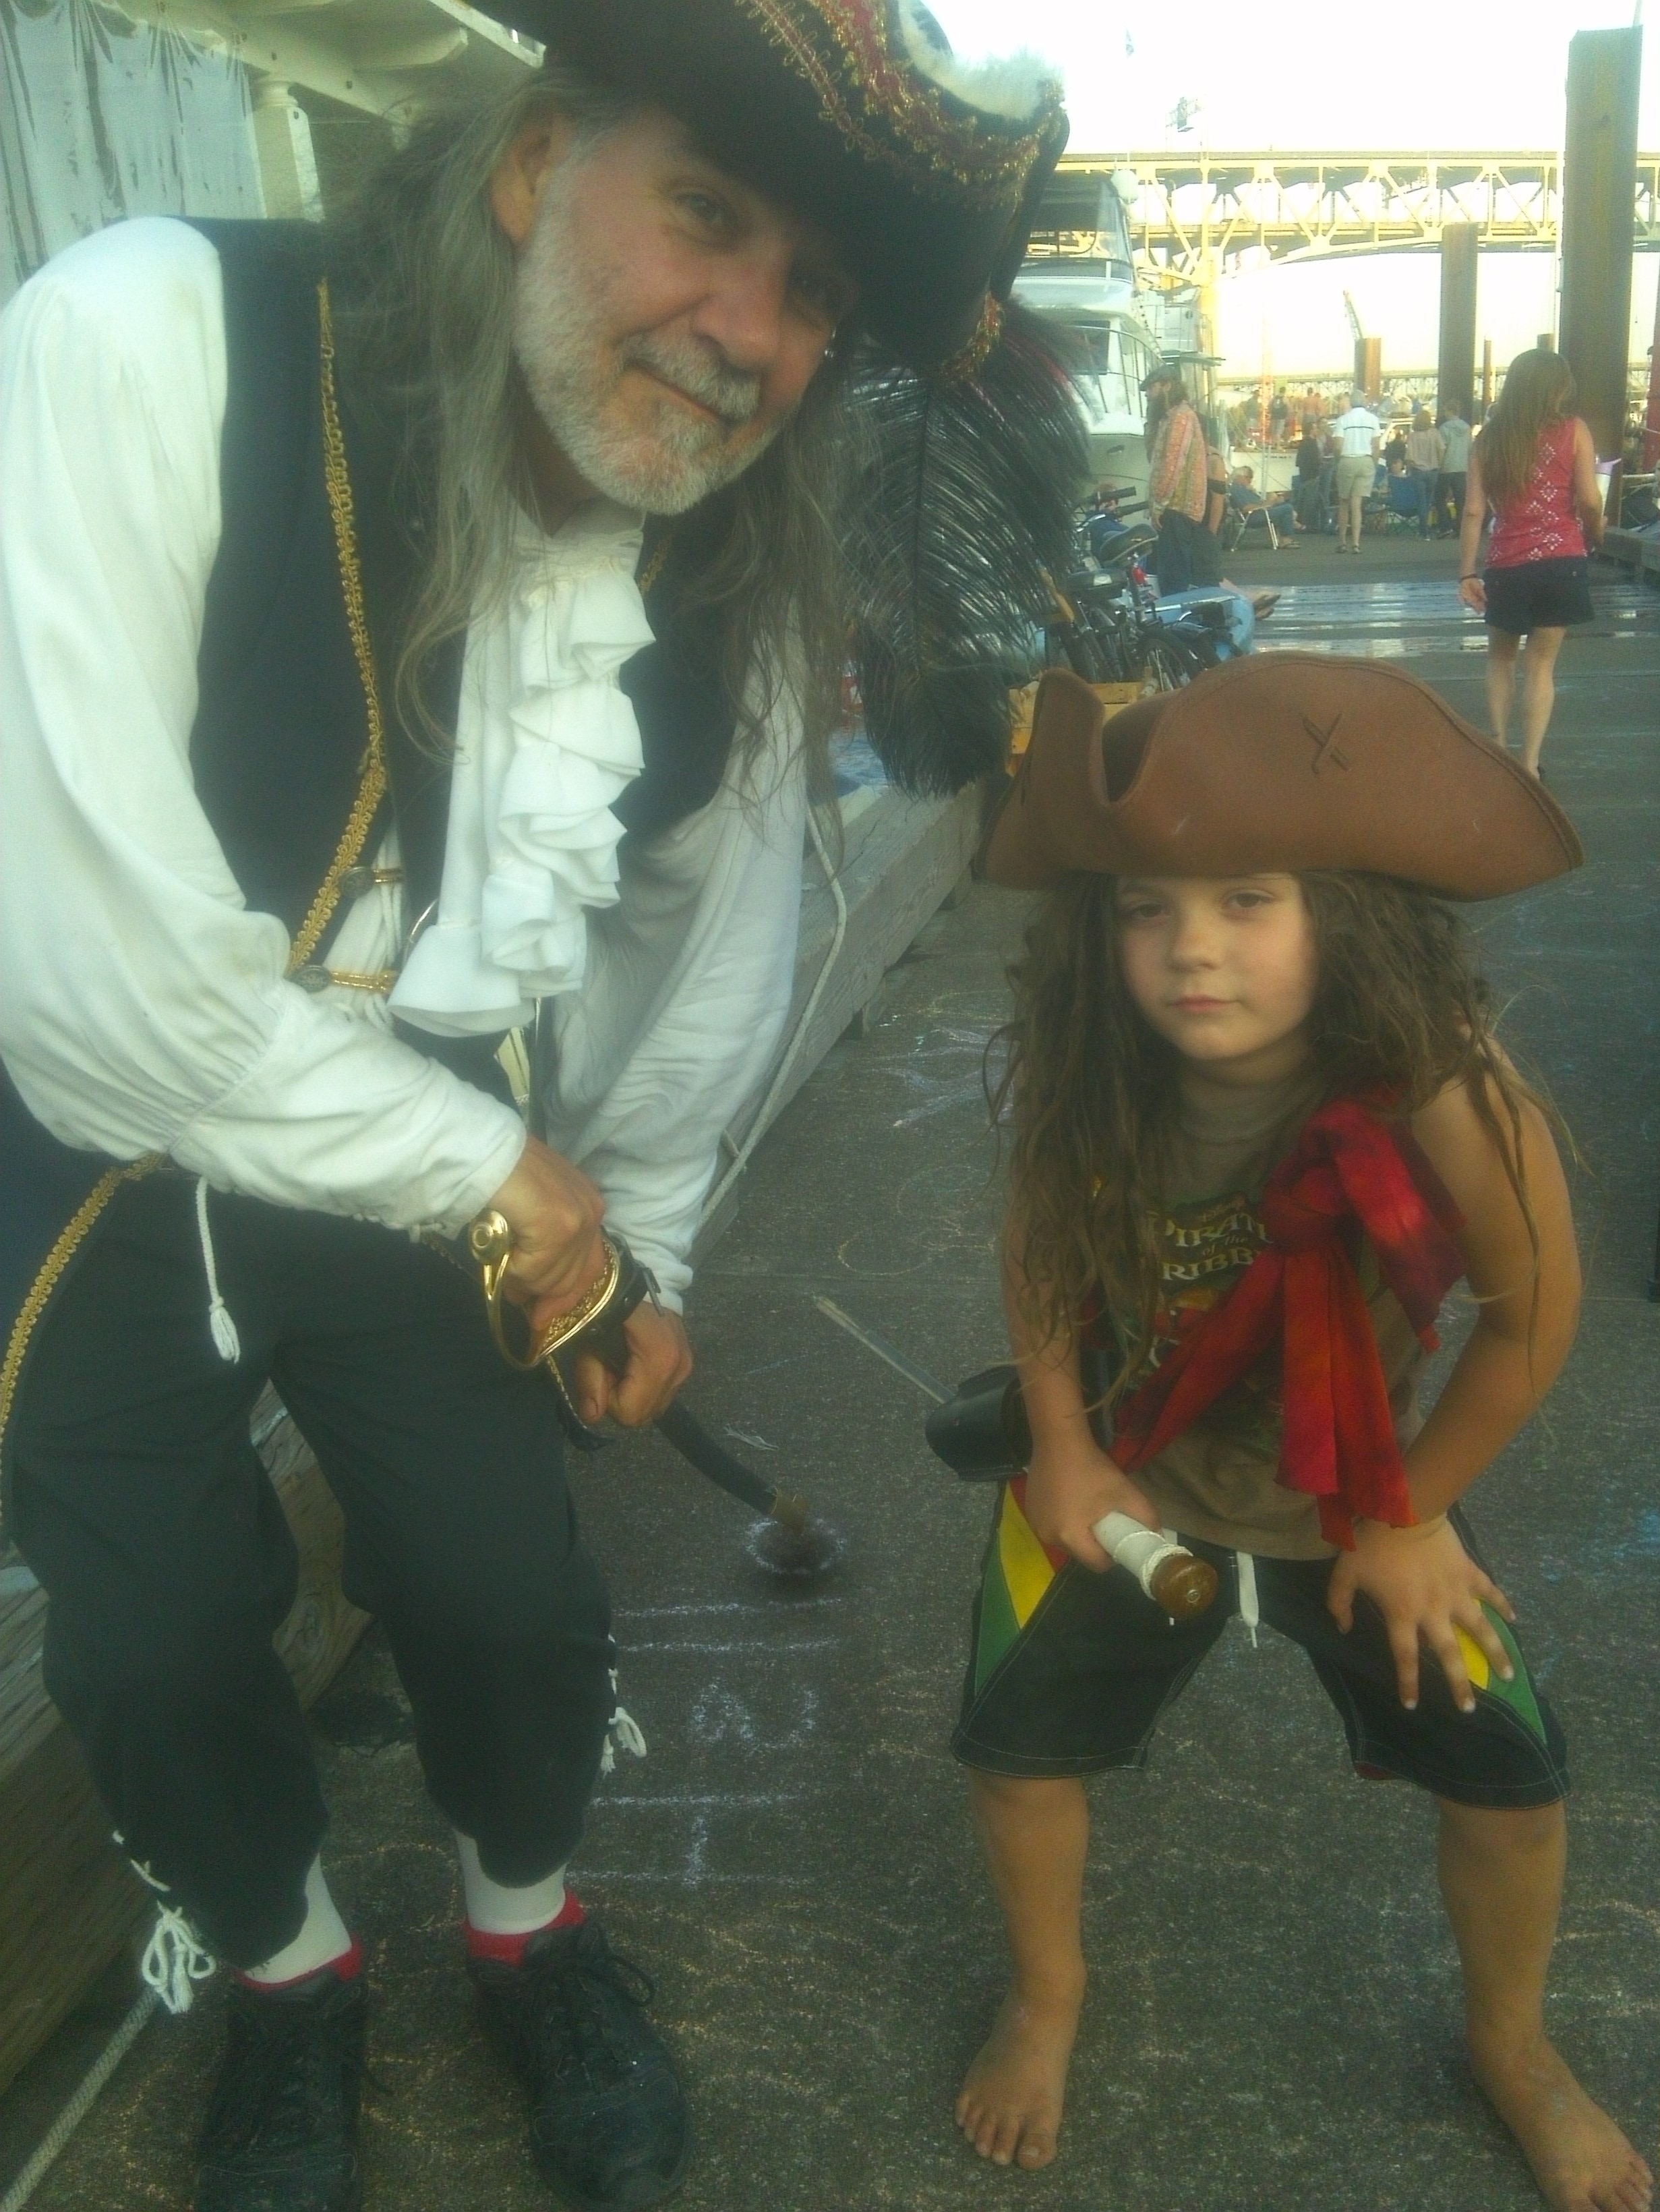 Pirate dad and son